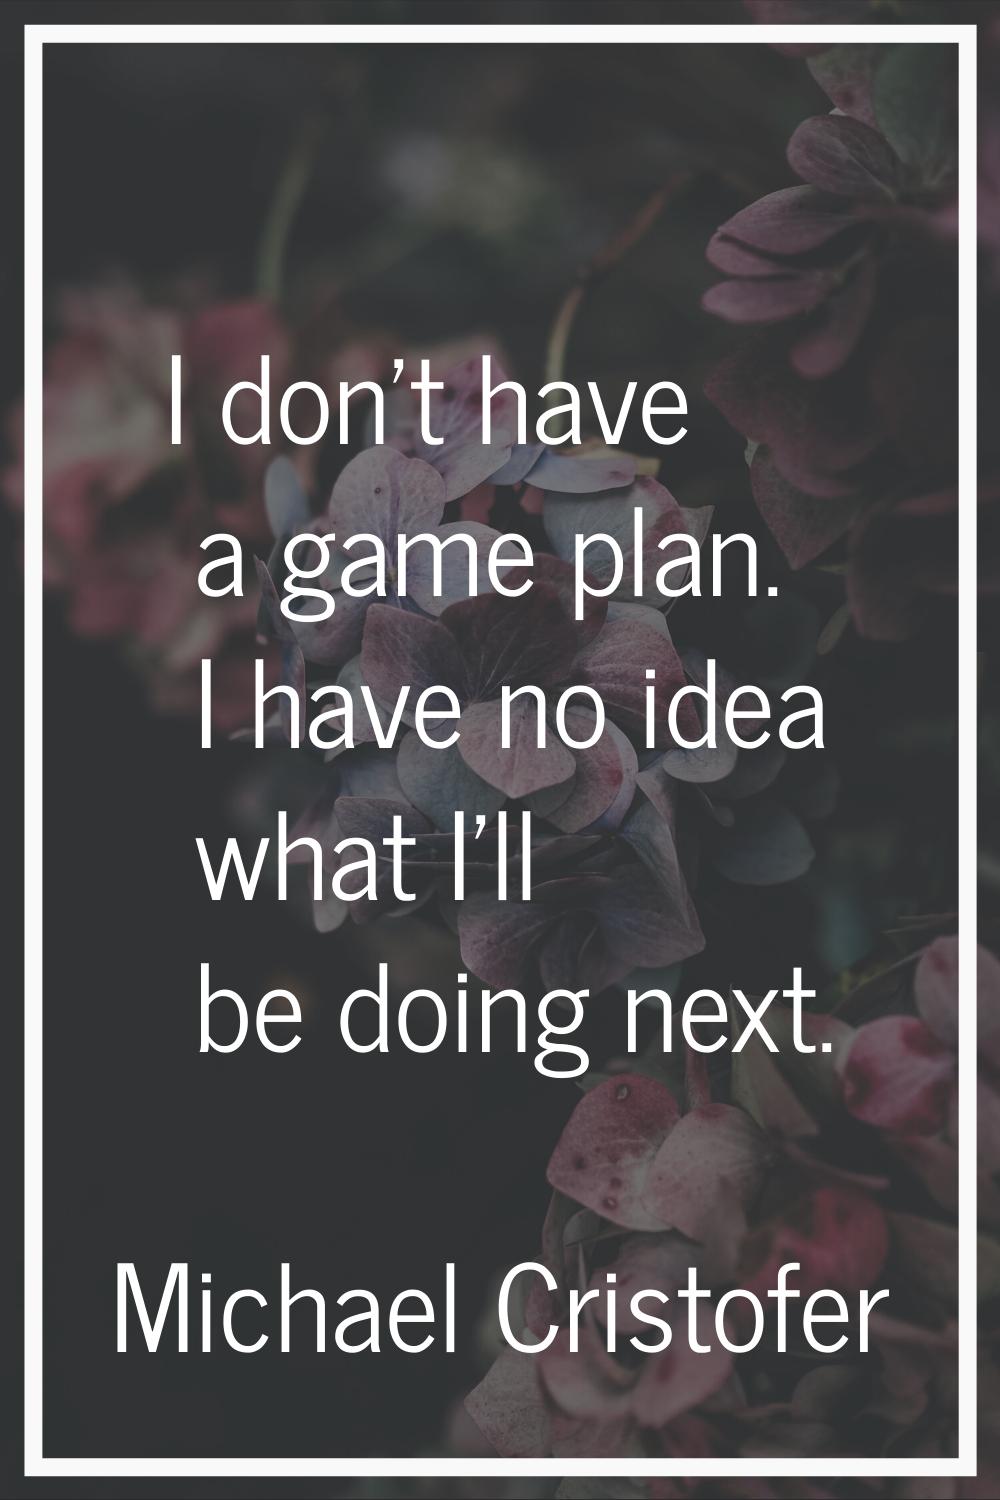 I don't have a game plan. I have no idea what I'll be doing next.